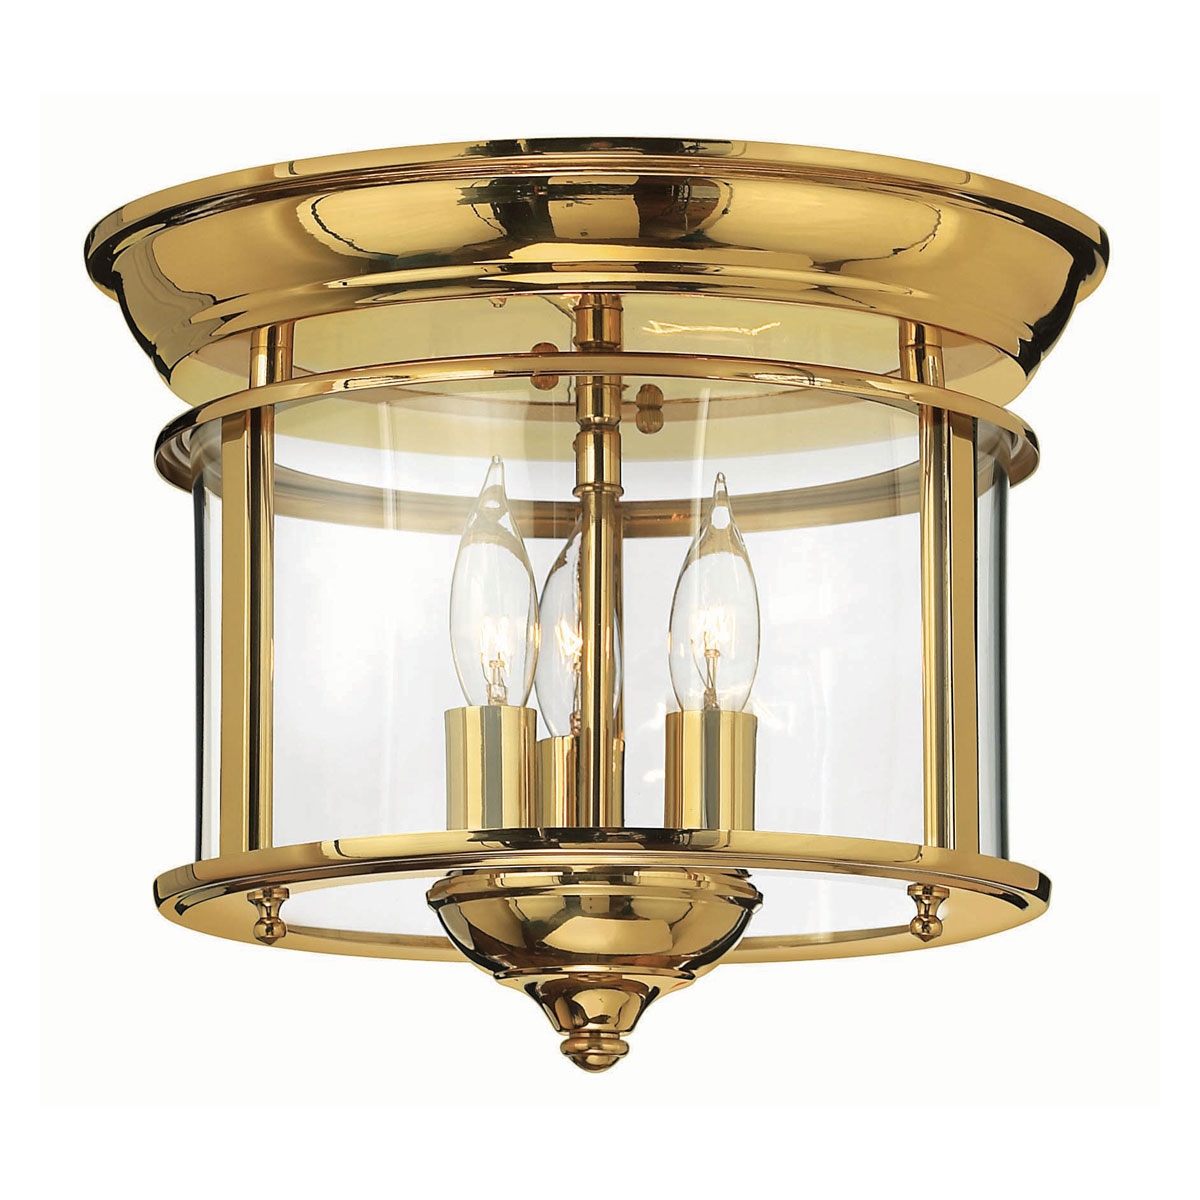 Permalink to Polished Brass Semi Flush Ceiling Lights